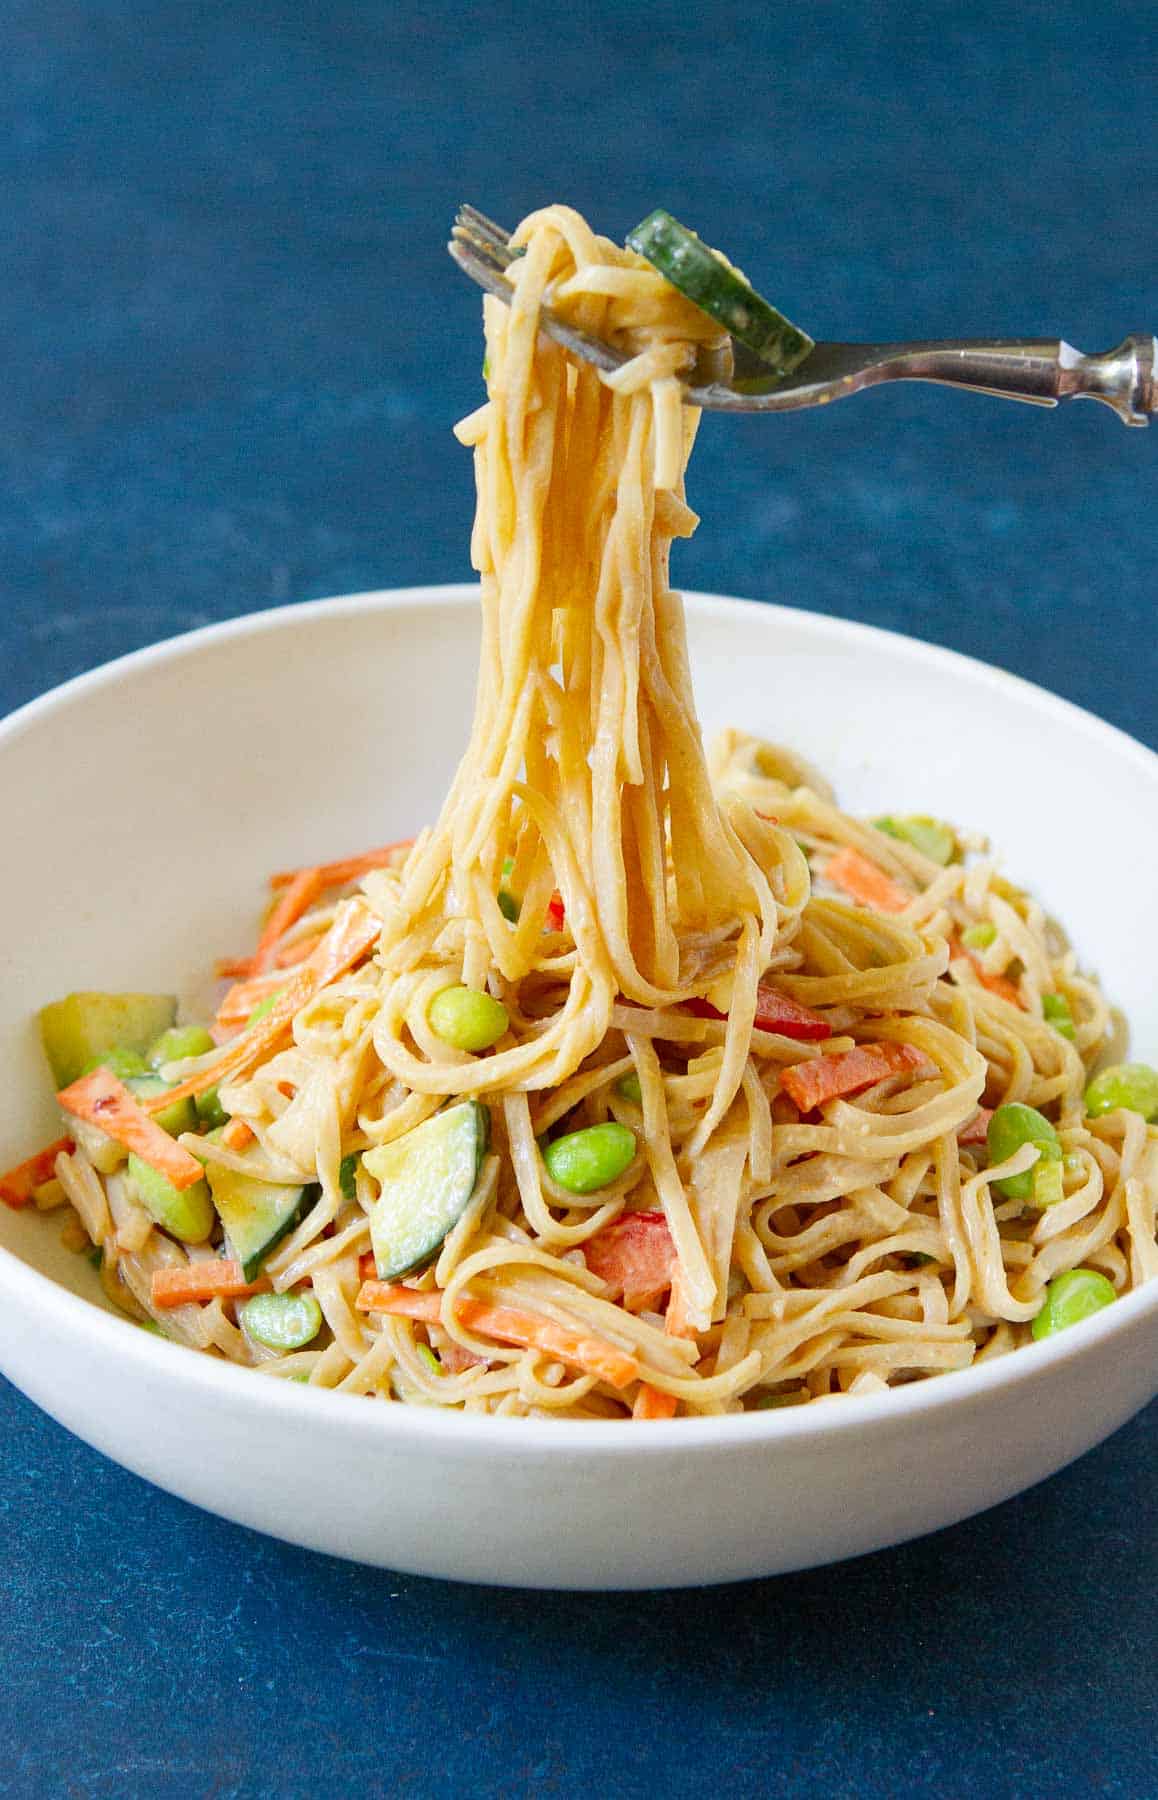 Peanut butter noodles with vegetables in a white bowl, with a fork.